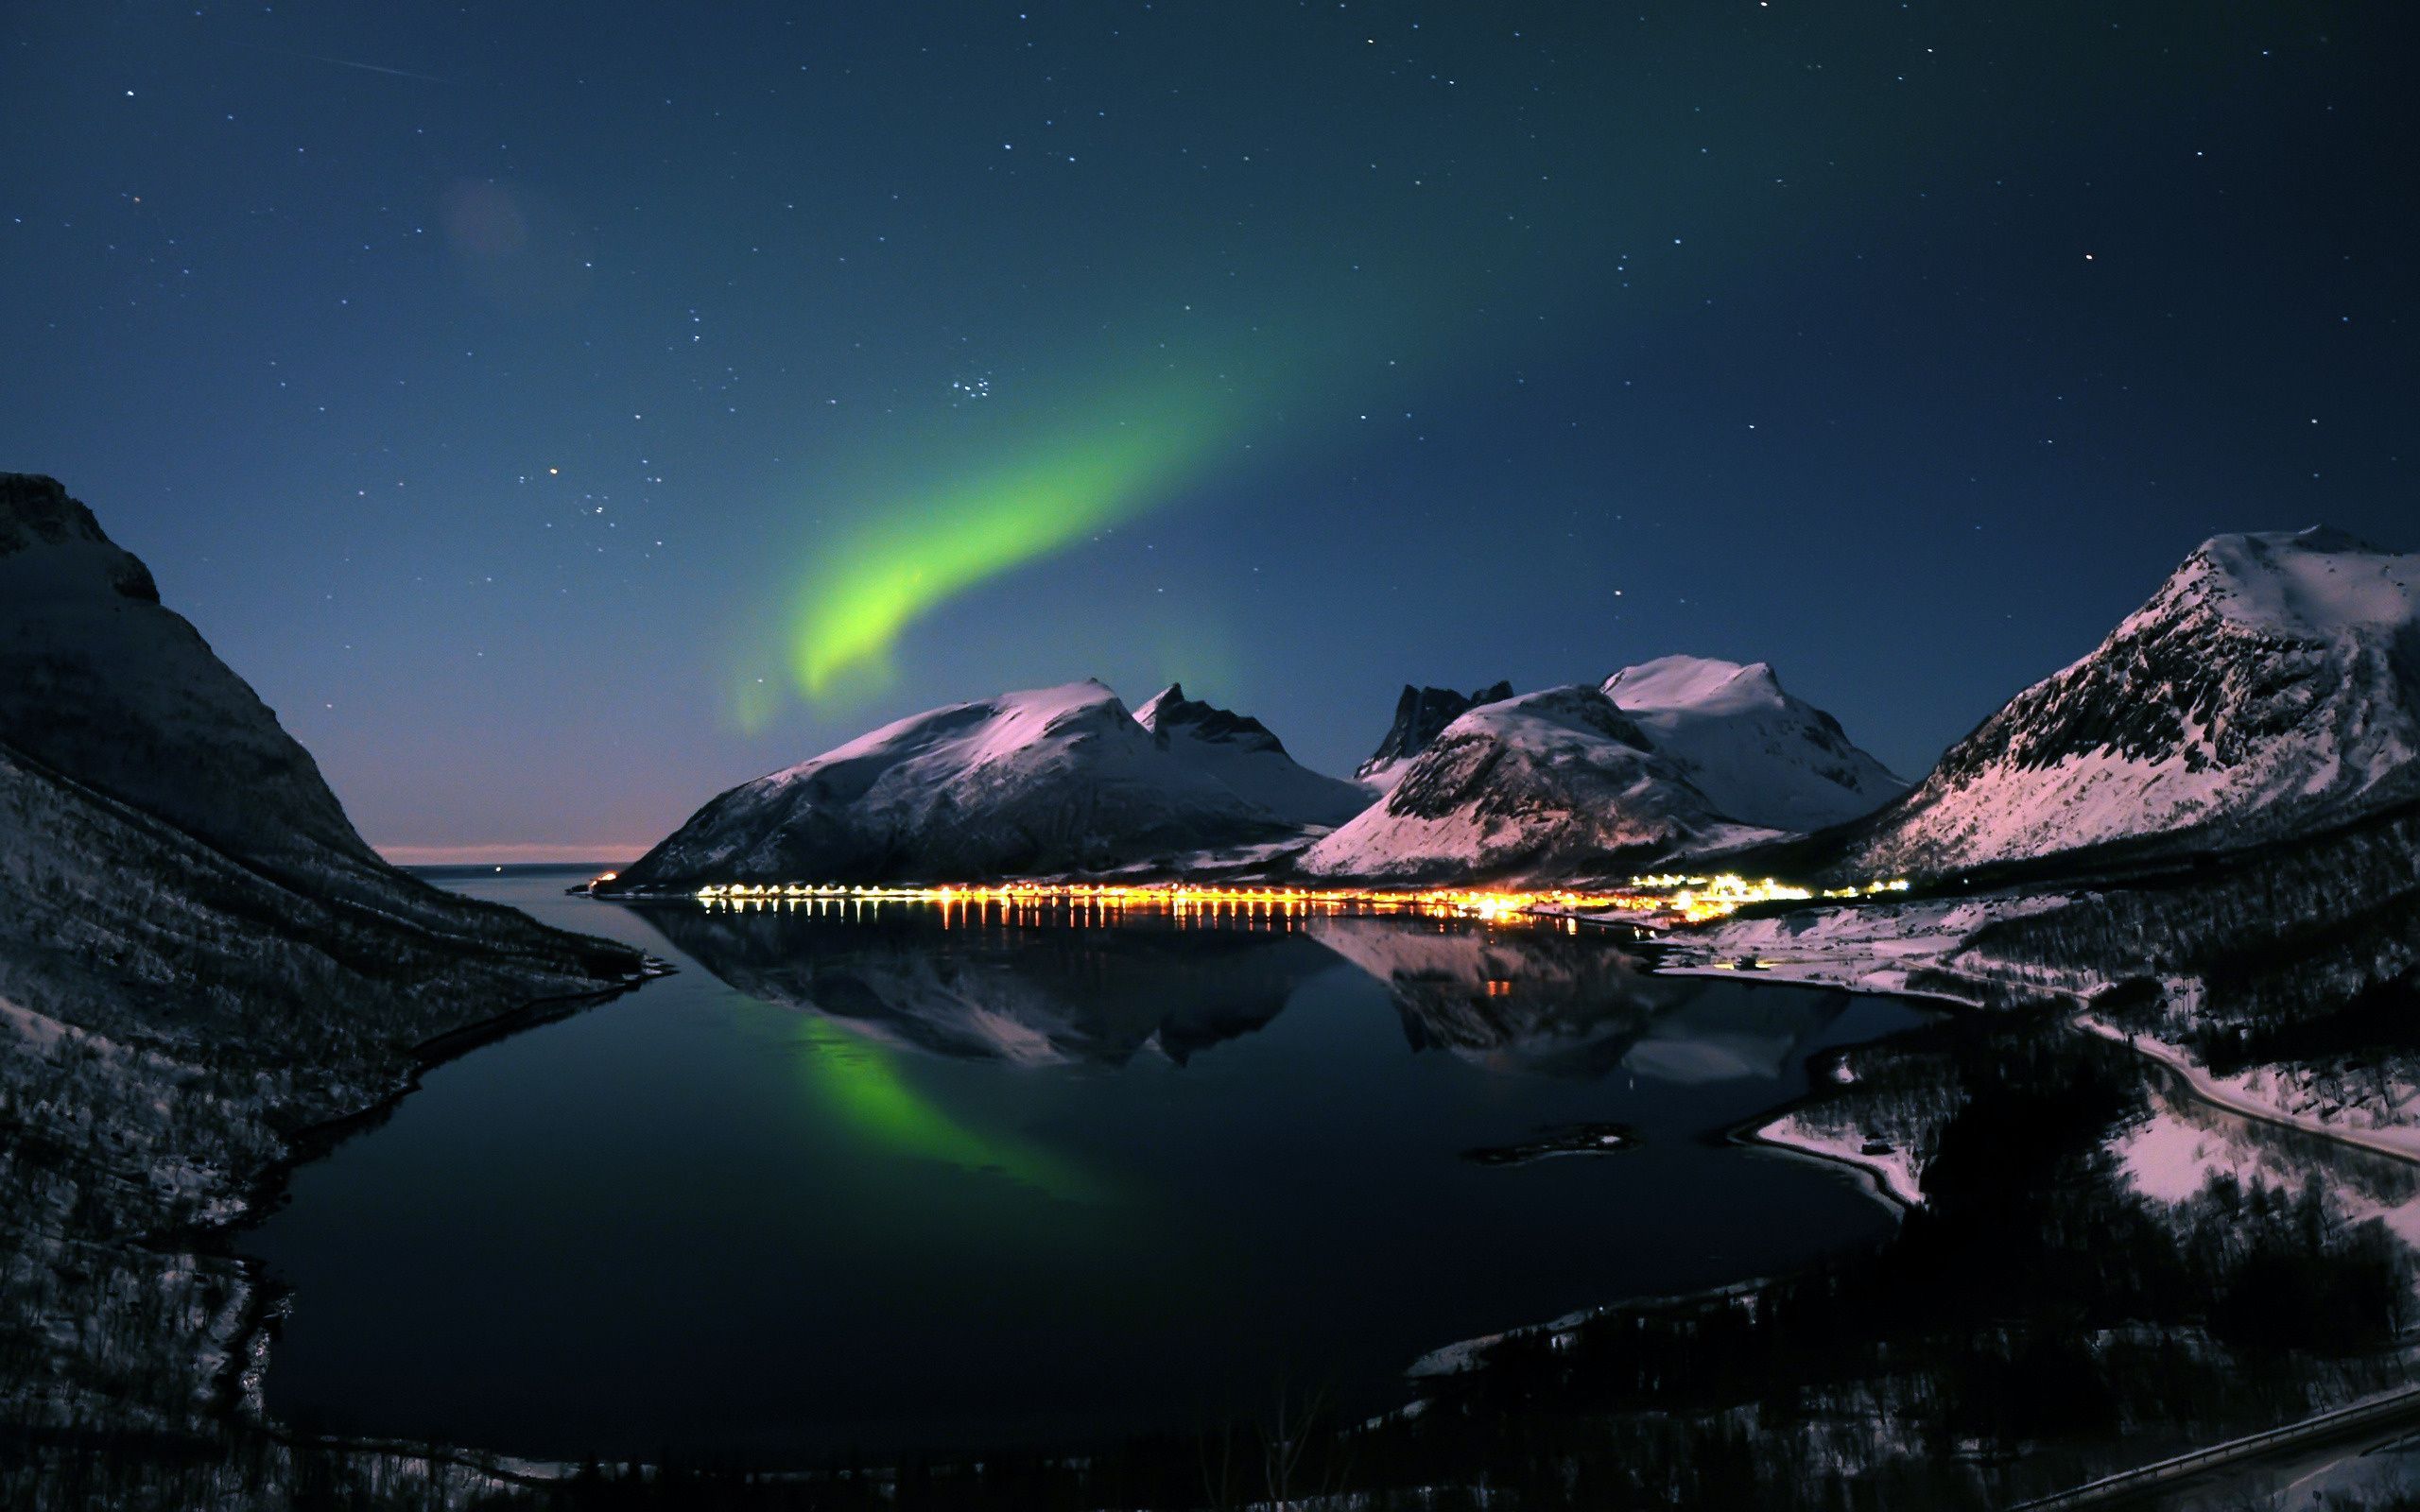 Strange Facts About the Northern Lights. Northern lights wallpaper, Northern lights, Lit wallpaper